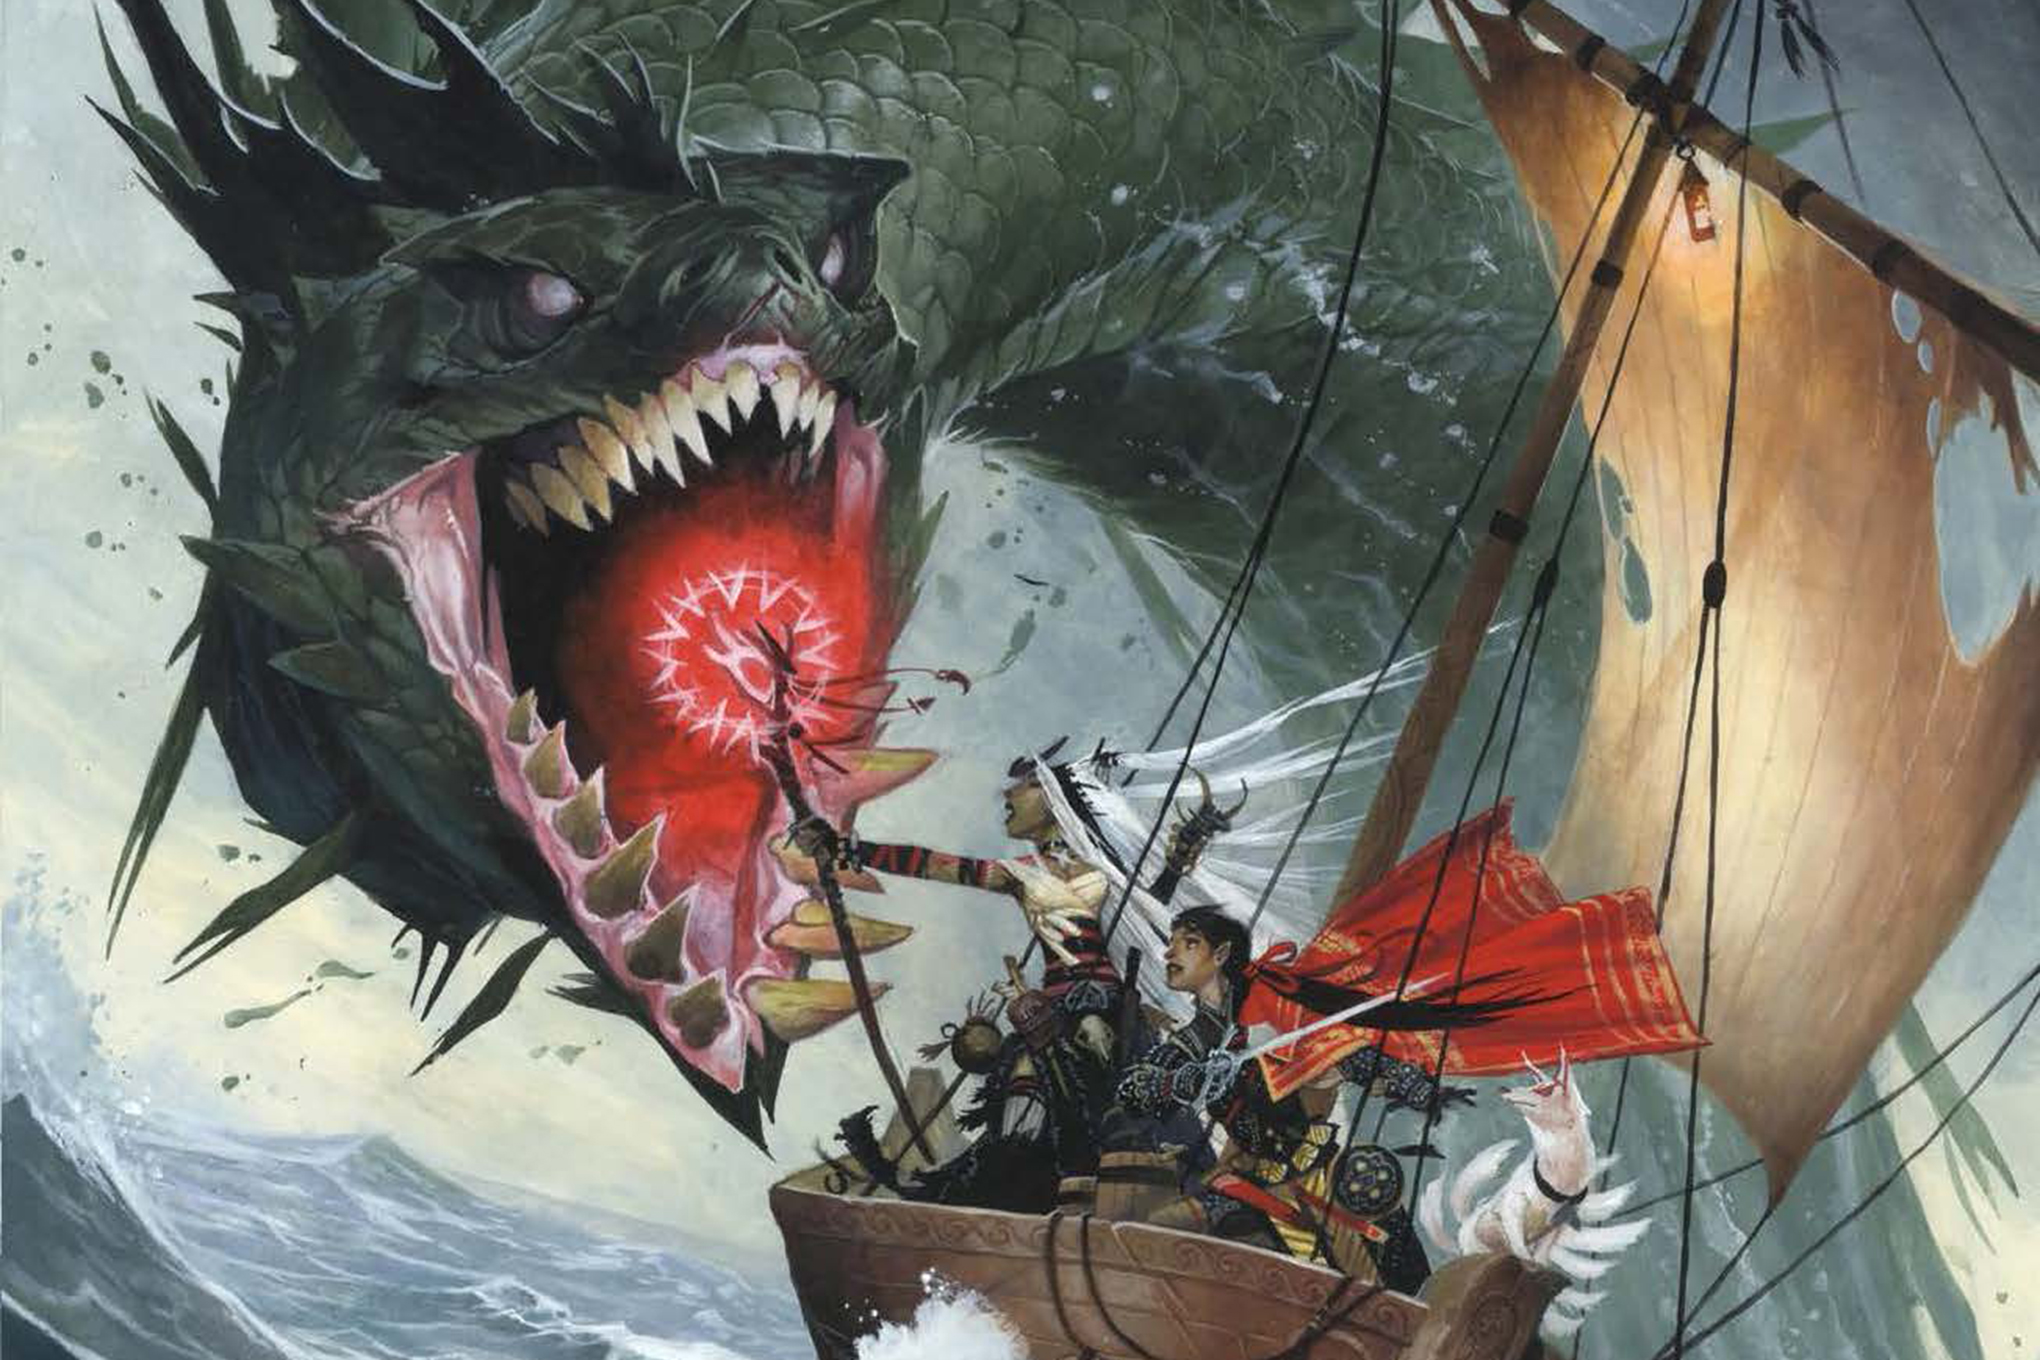 Cover art for Pathfinder 2e’s new Advanced Players Guide features a sea serpent.